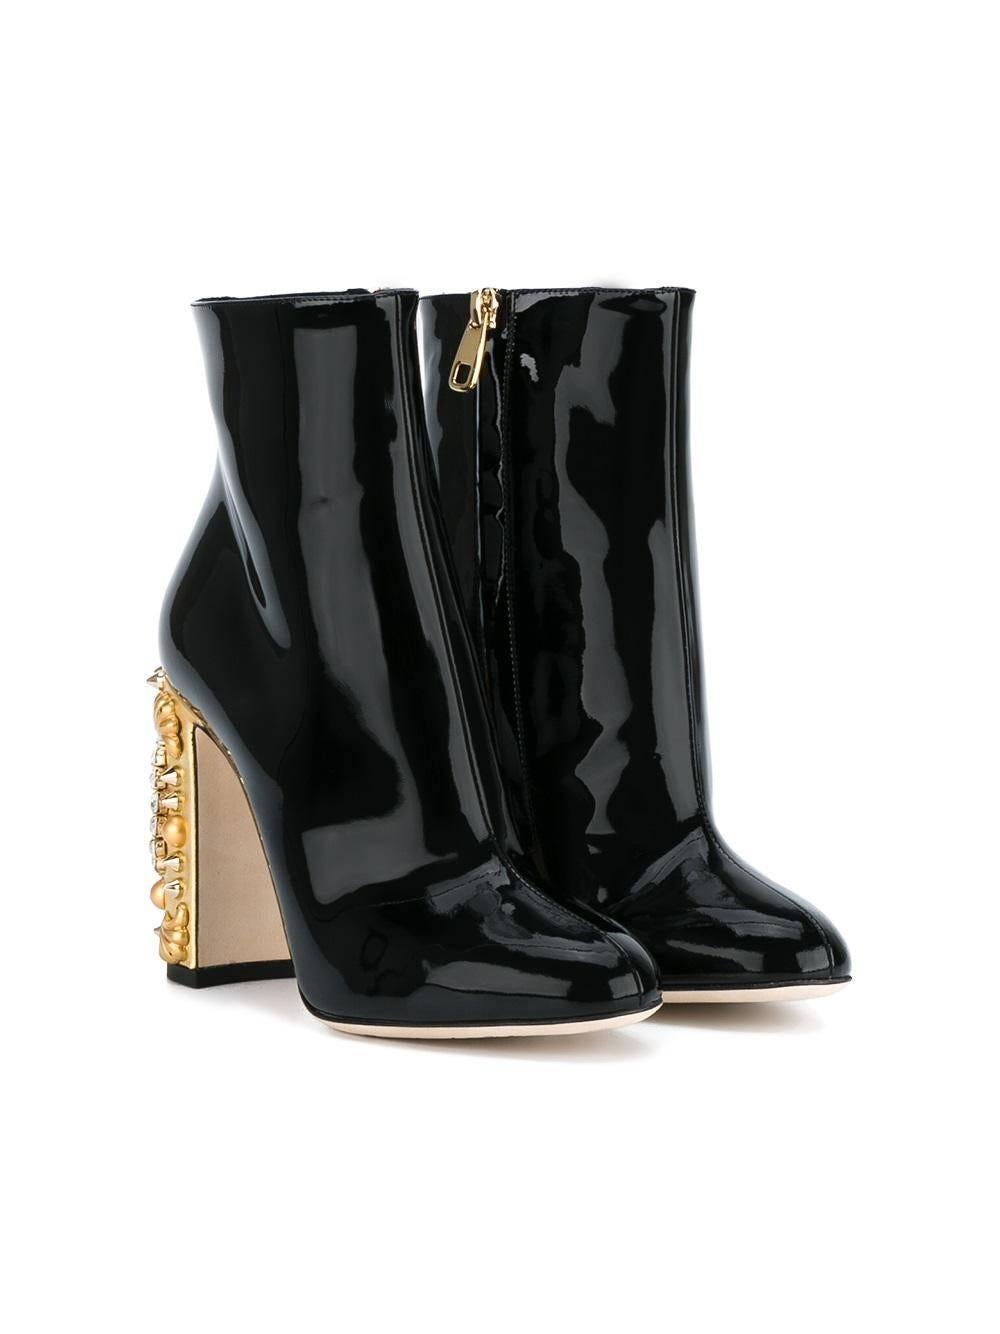 Women's Dolce & Gabbana NEW & SOLD OUT Black Gold Crystal Spike Ankle Booties in Box